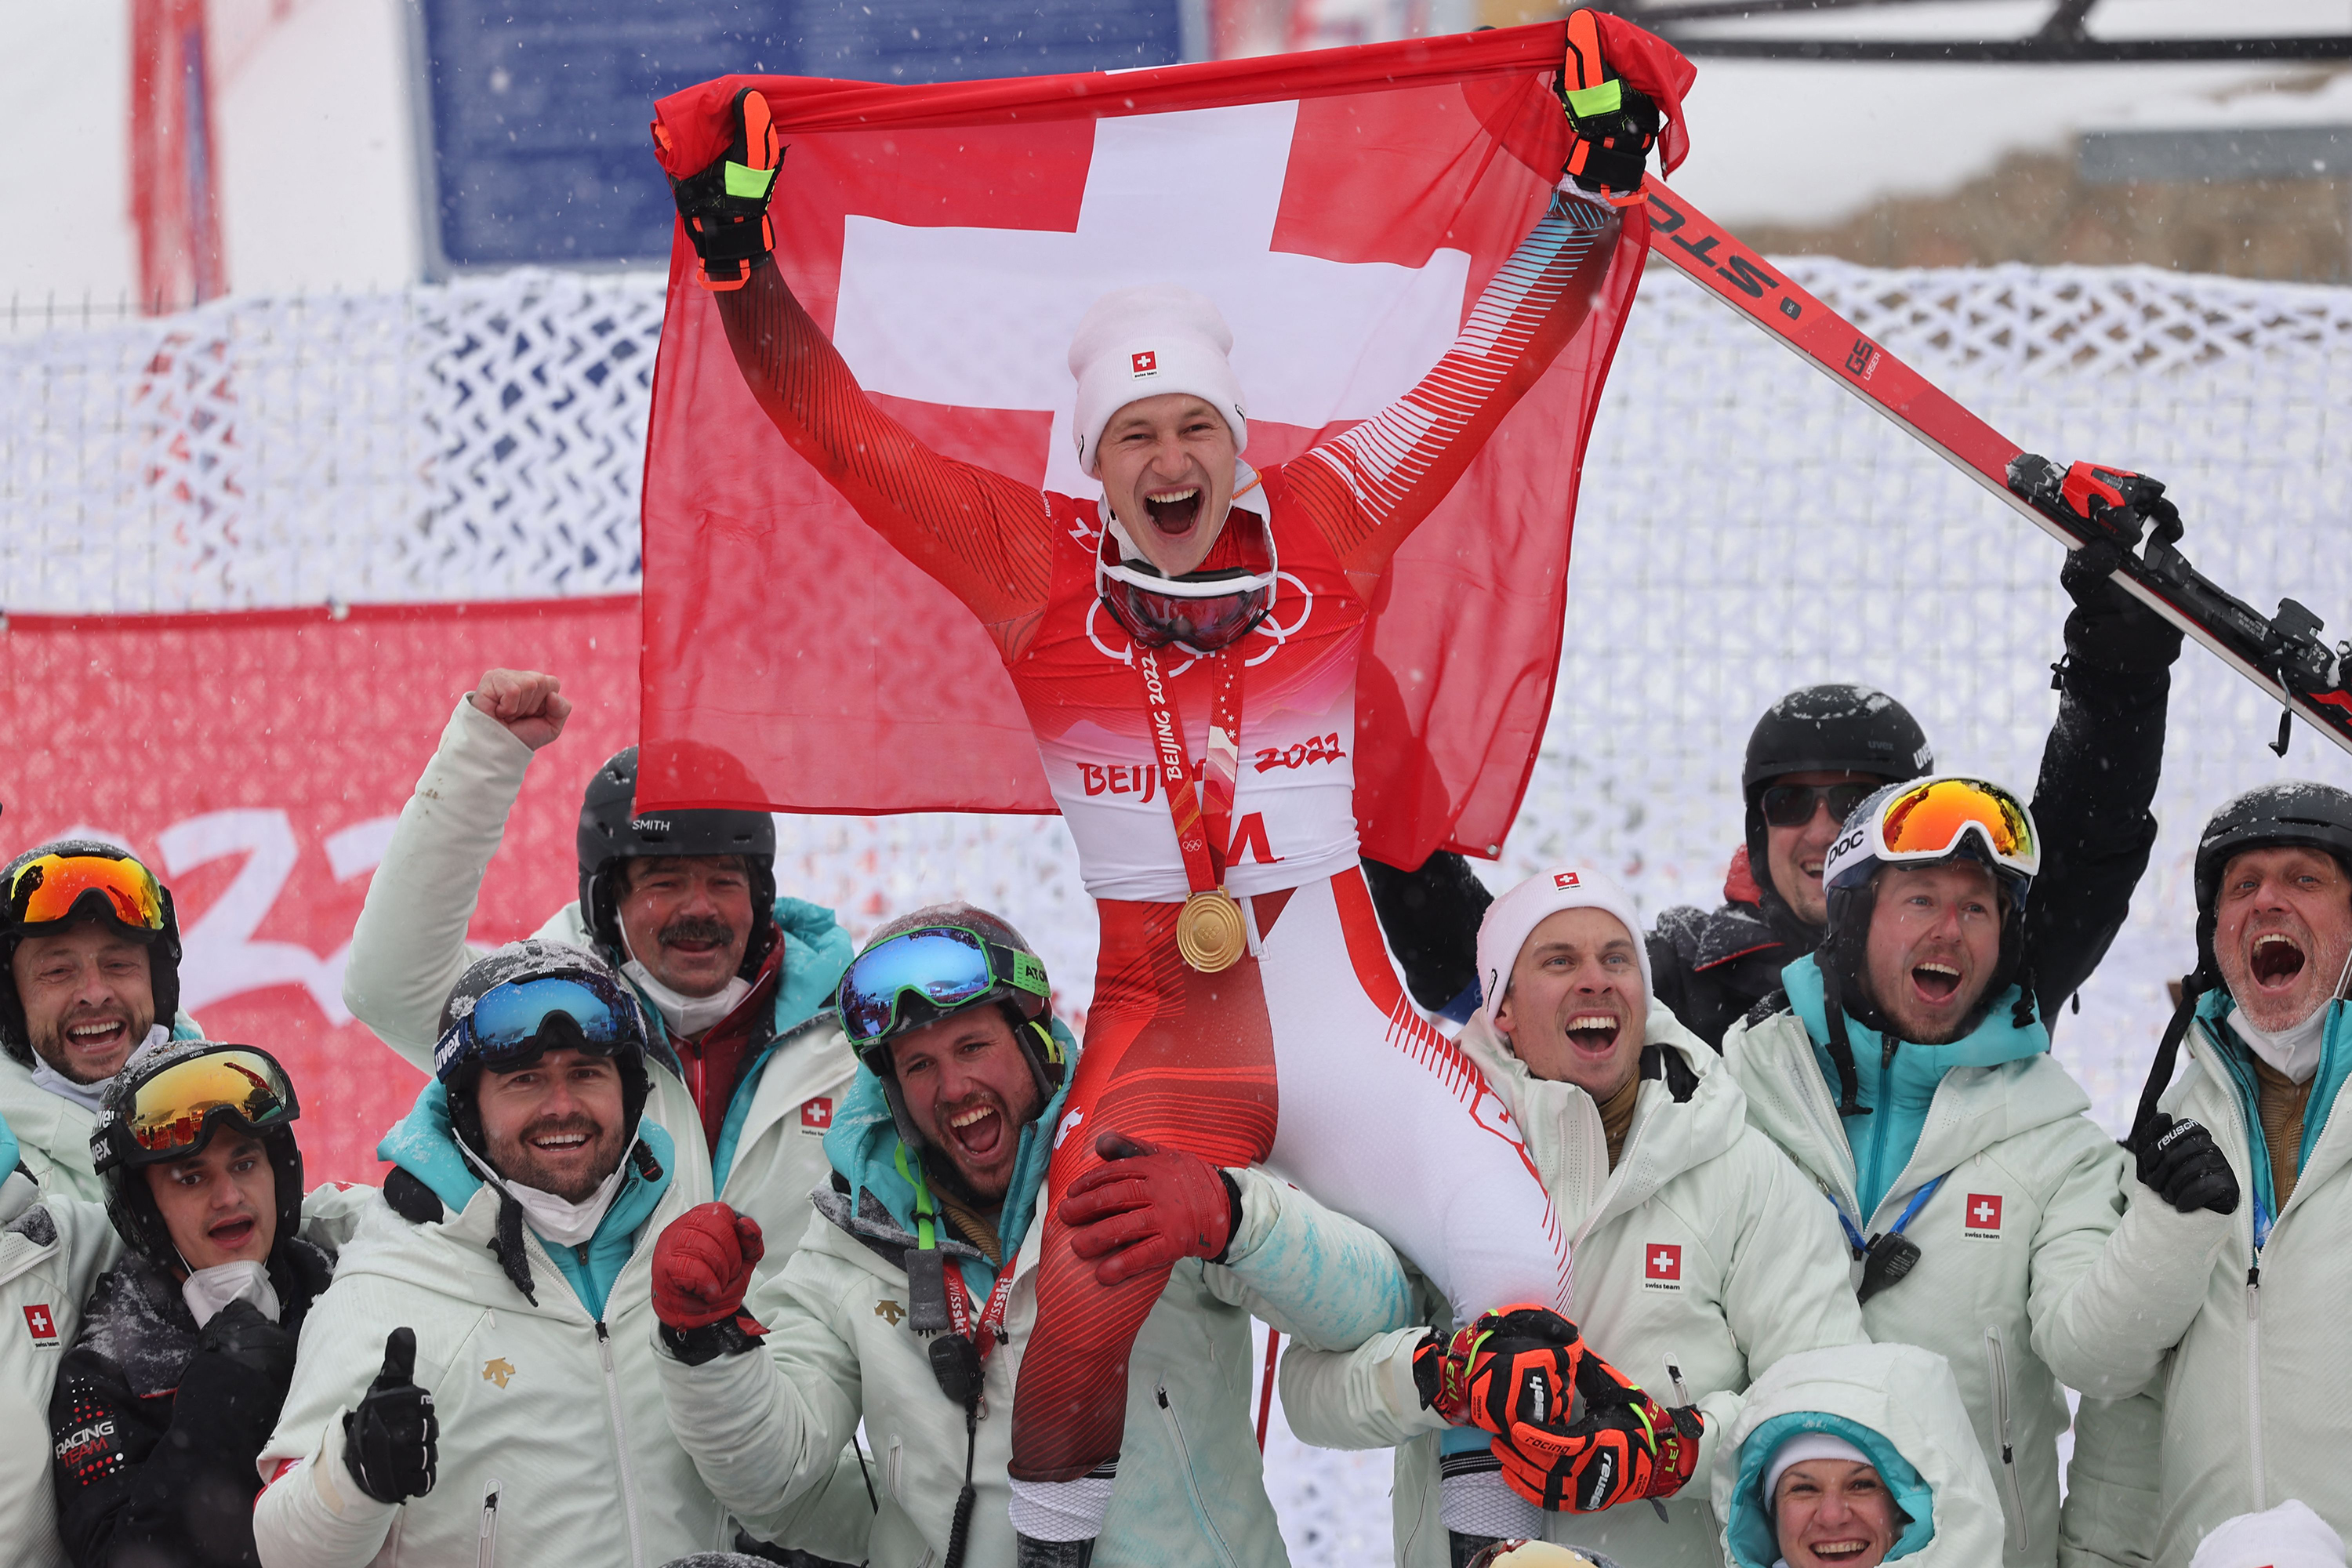 Gold medalist Switzerland's Marco Odermatt (C) celebrates with his team after the men's giant slalom victory ceremony on Sunday.